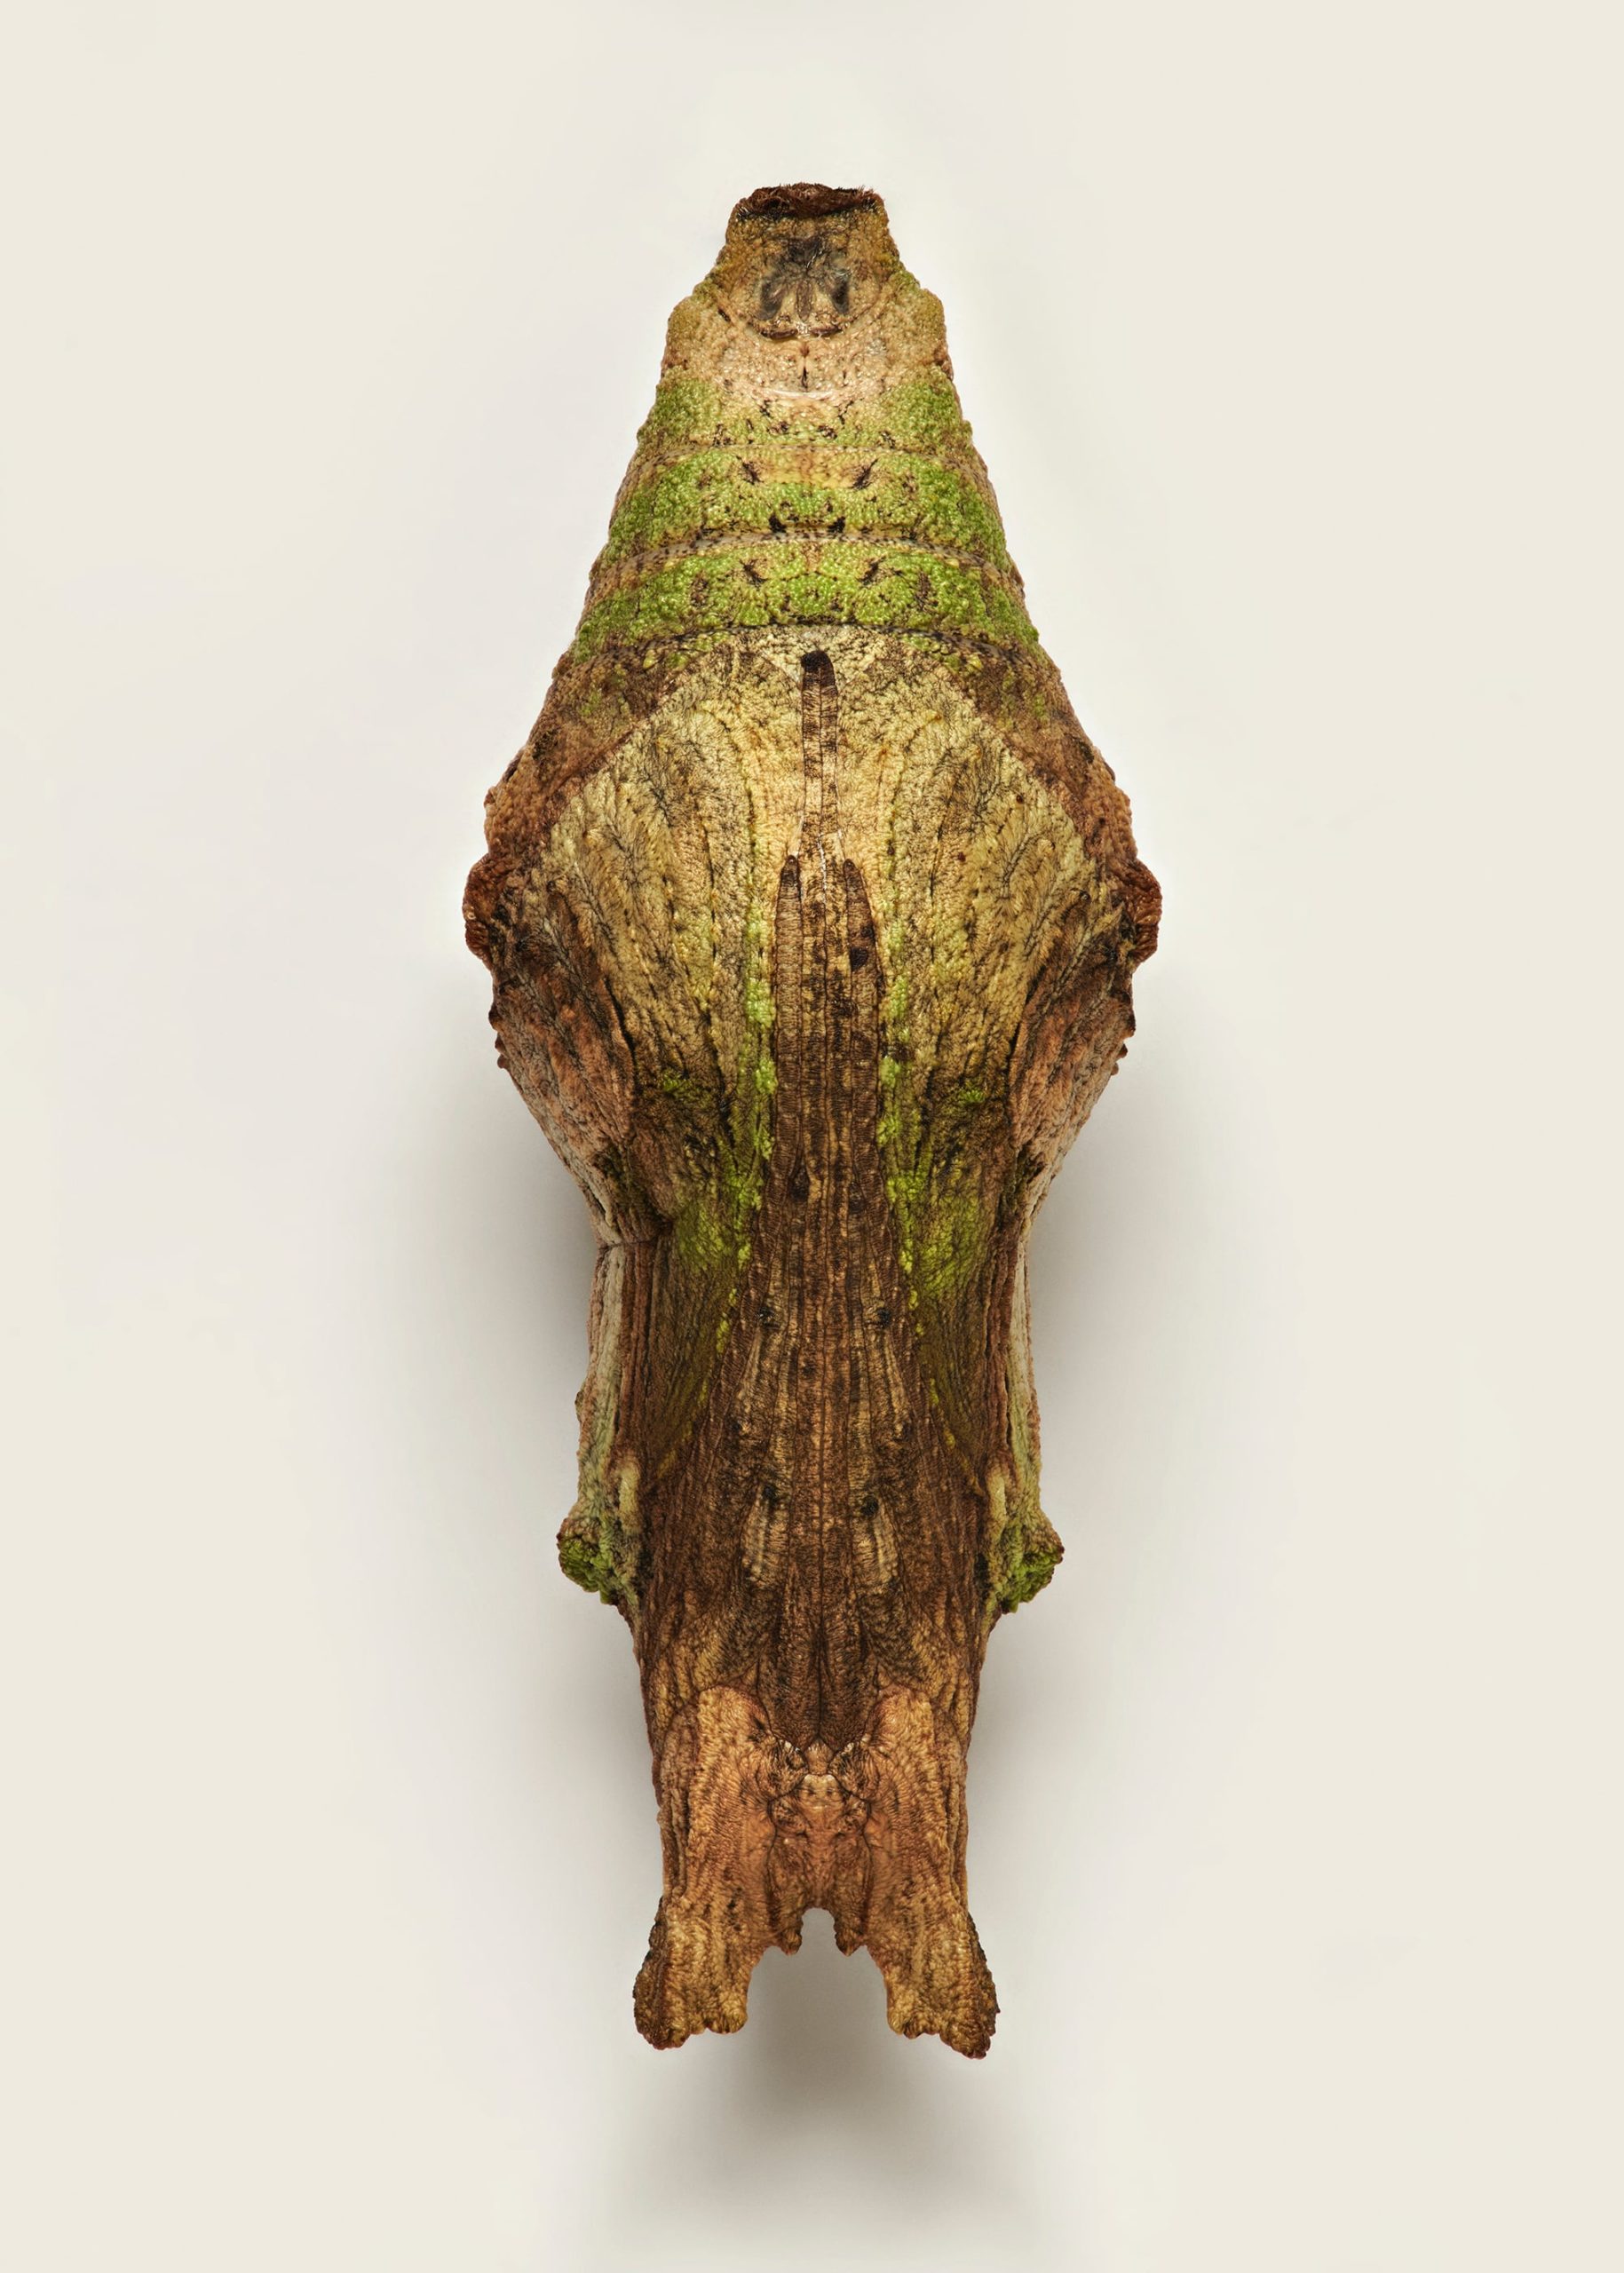 A photo of a butterfly pupa that looks like mossy bark